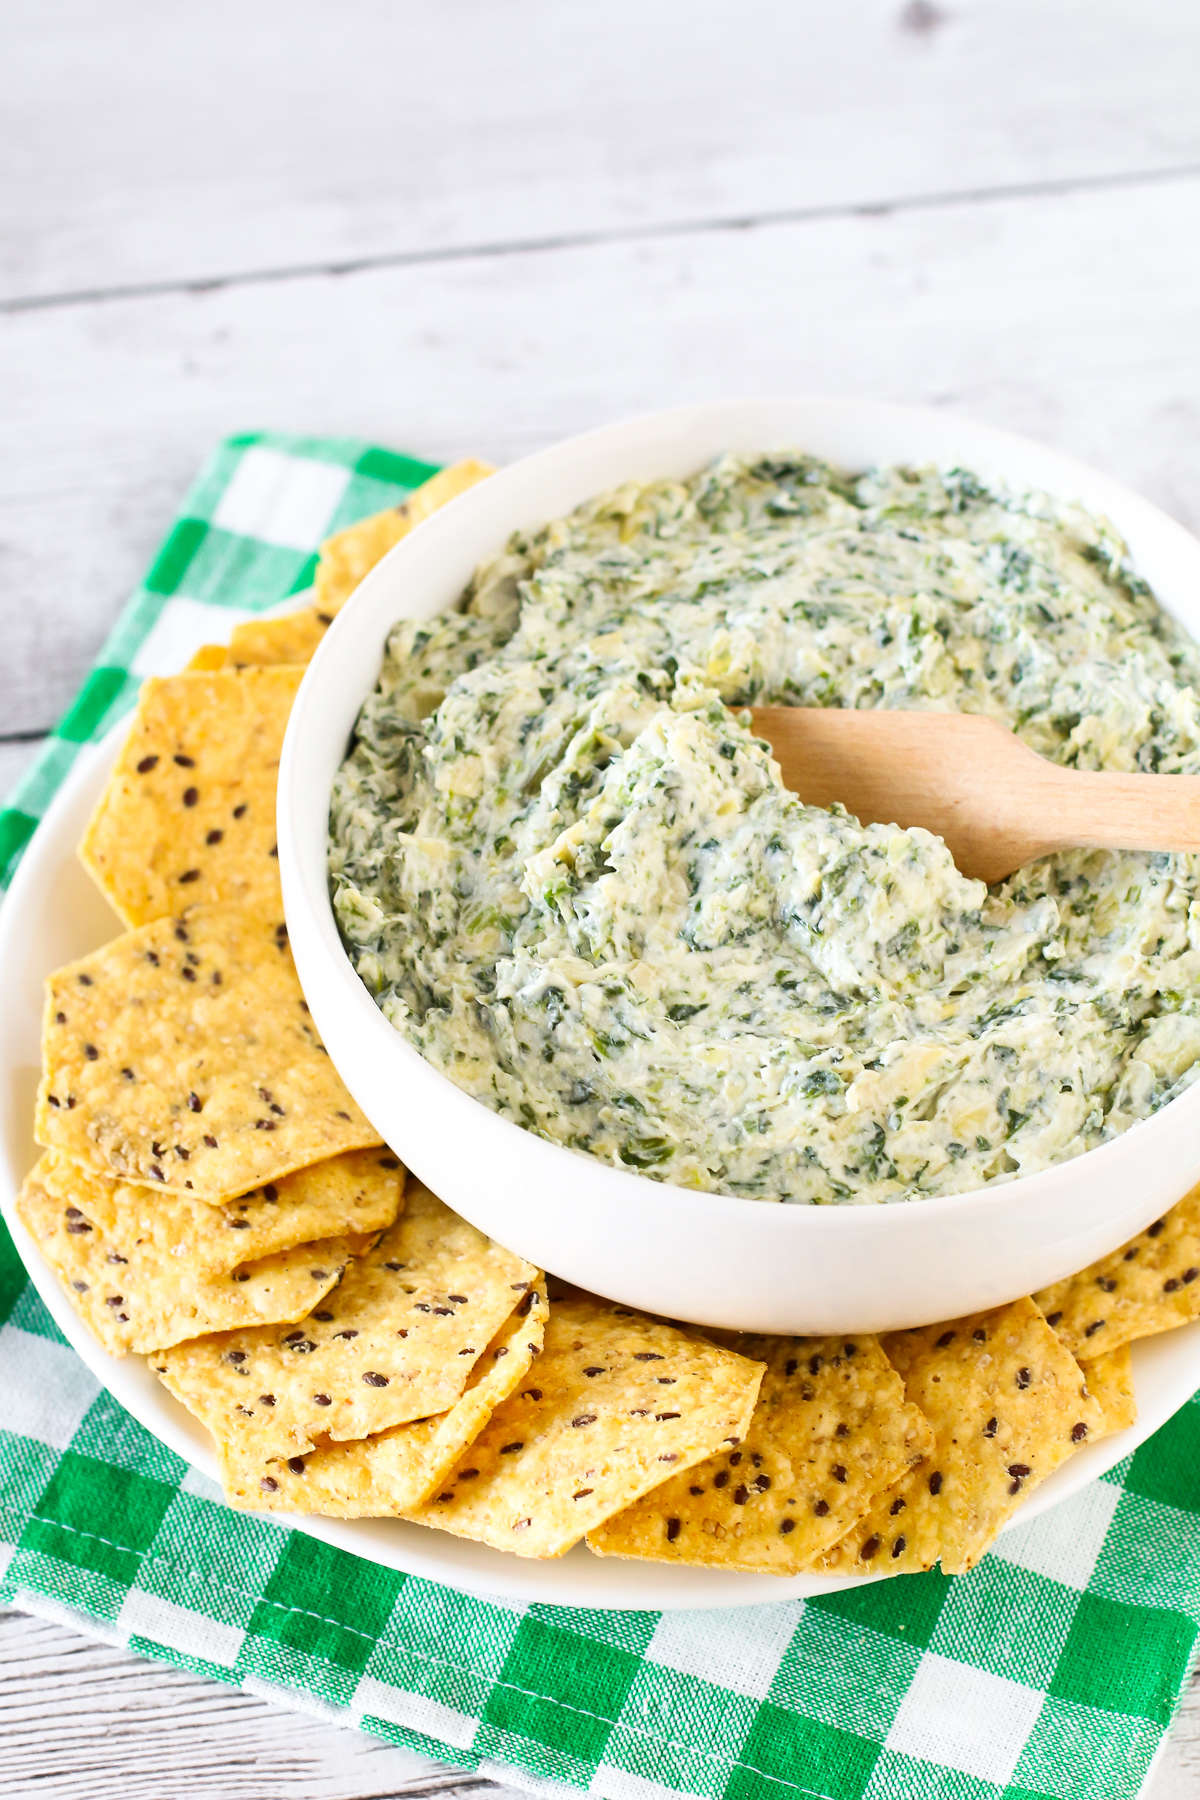 Dairy Free Spinach Artichoke Dip. A classic dip, made dairy free and delicious! Can be served both cold or hot.